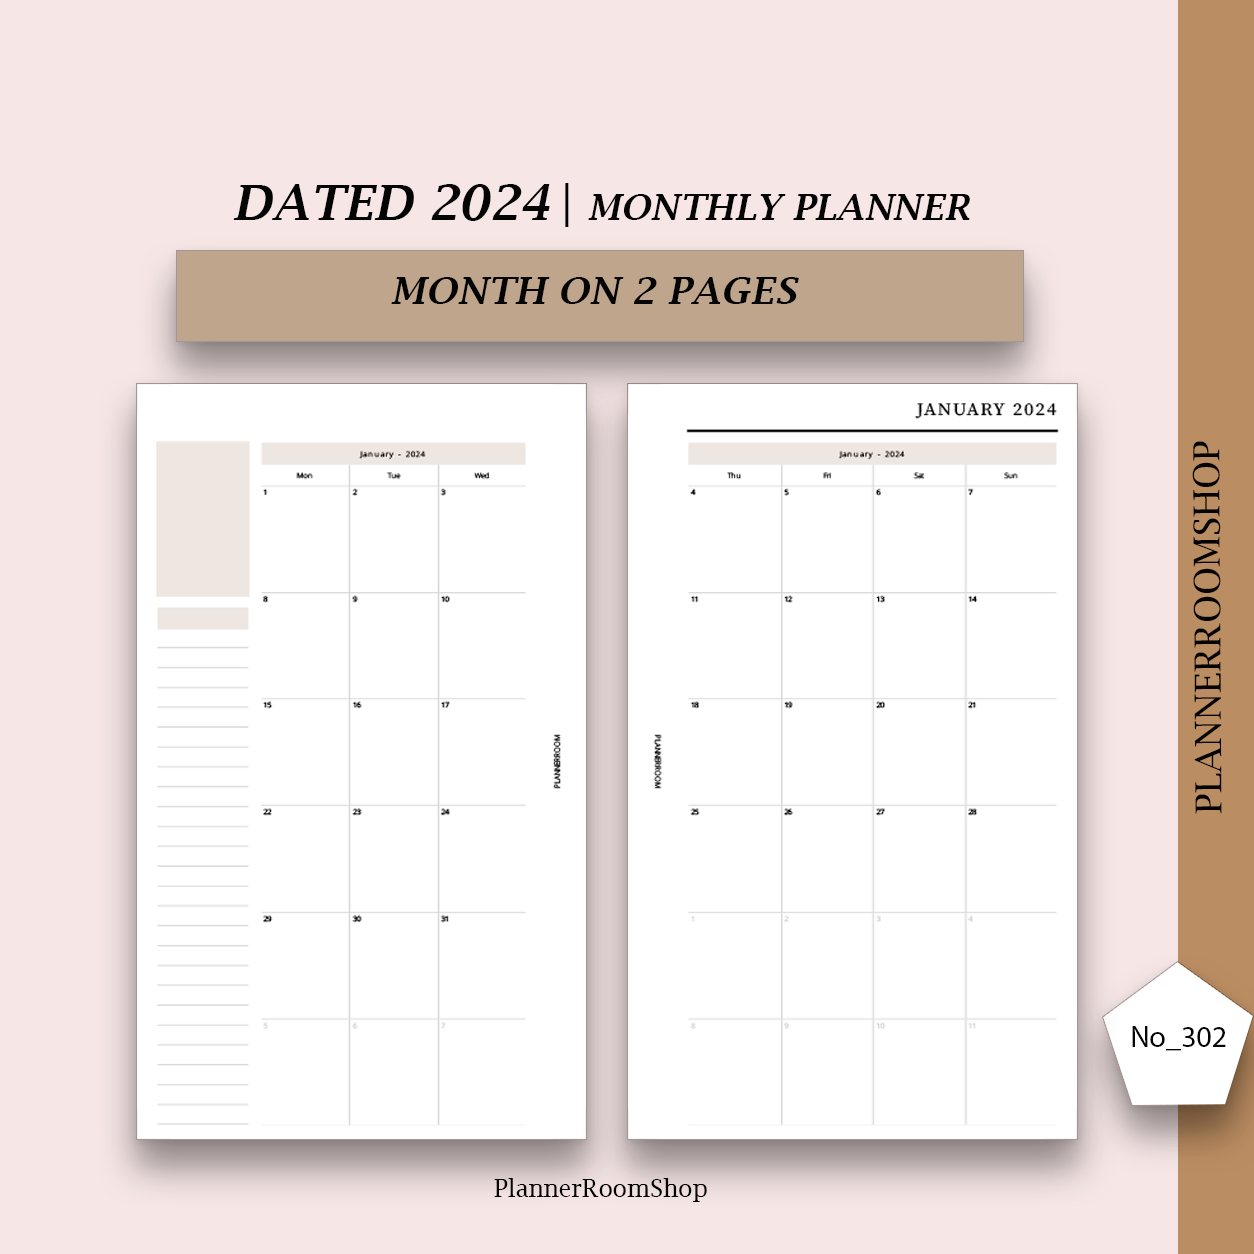 PRINTABLE 2024 dated monthly planner (302)